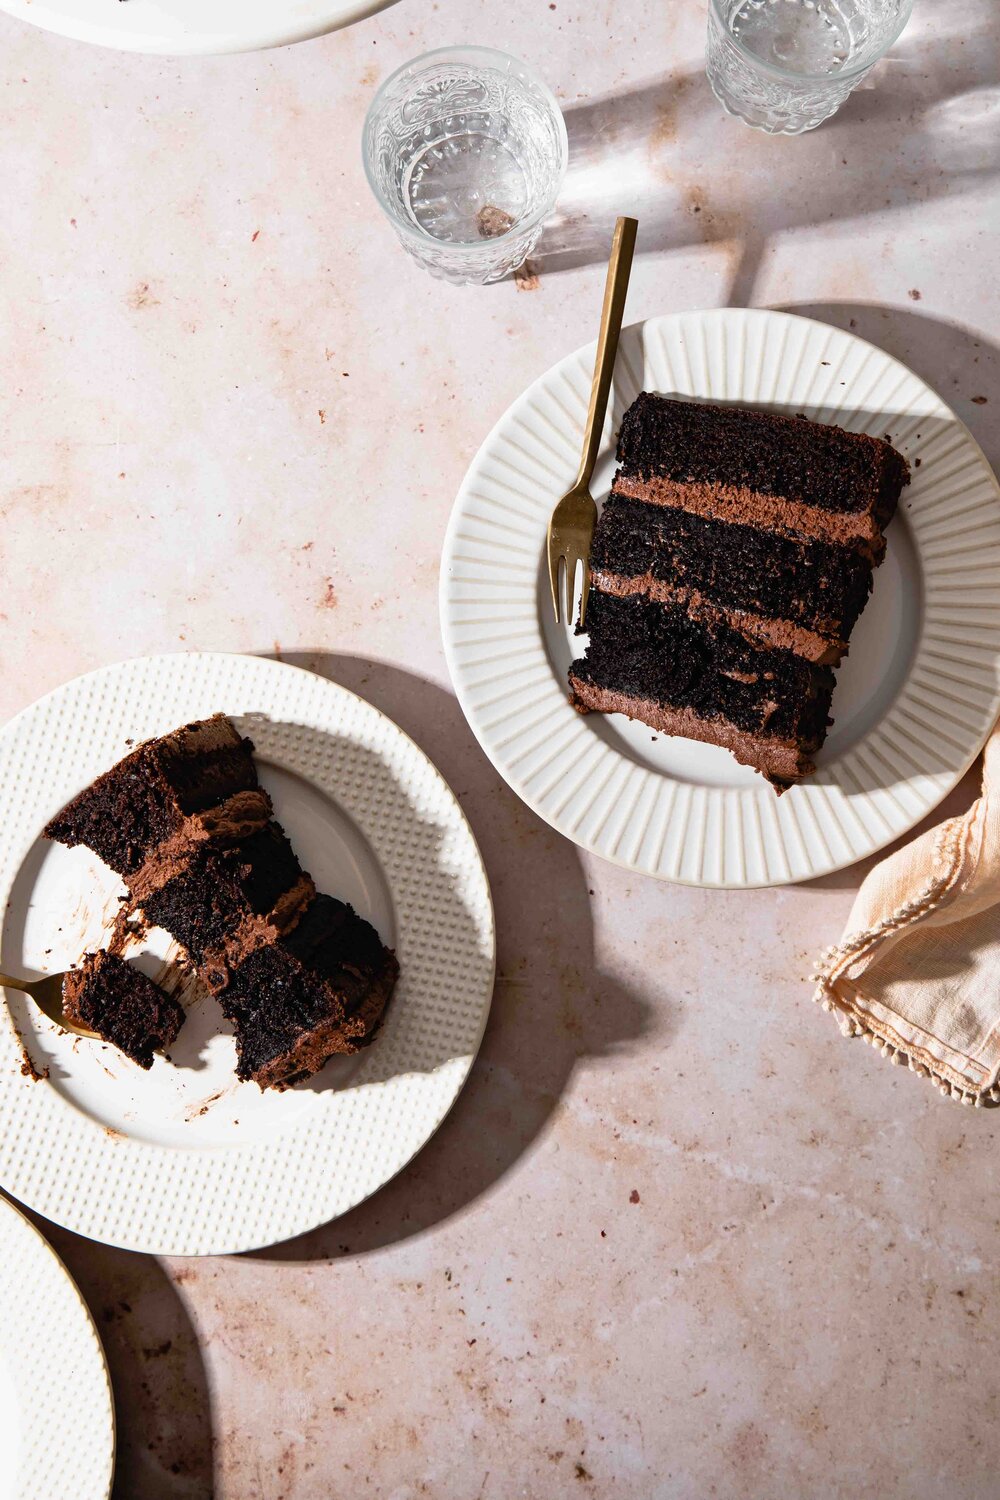 A photo of slices of moist chocolate cake with fudge frosting wtih sunlight and harsh shadows set on cream colored marble table.